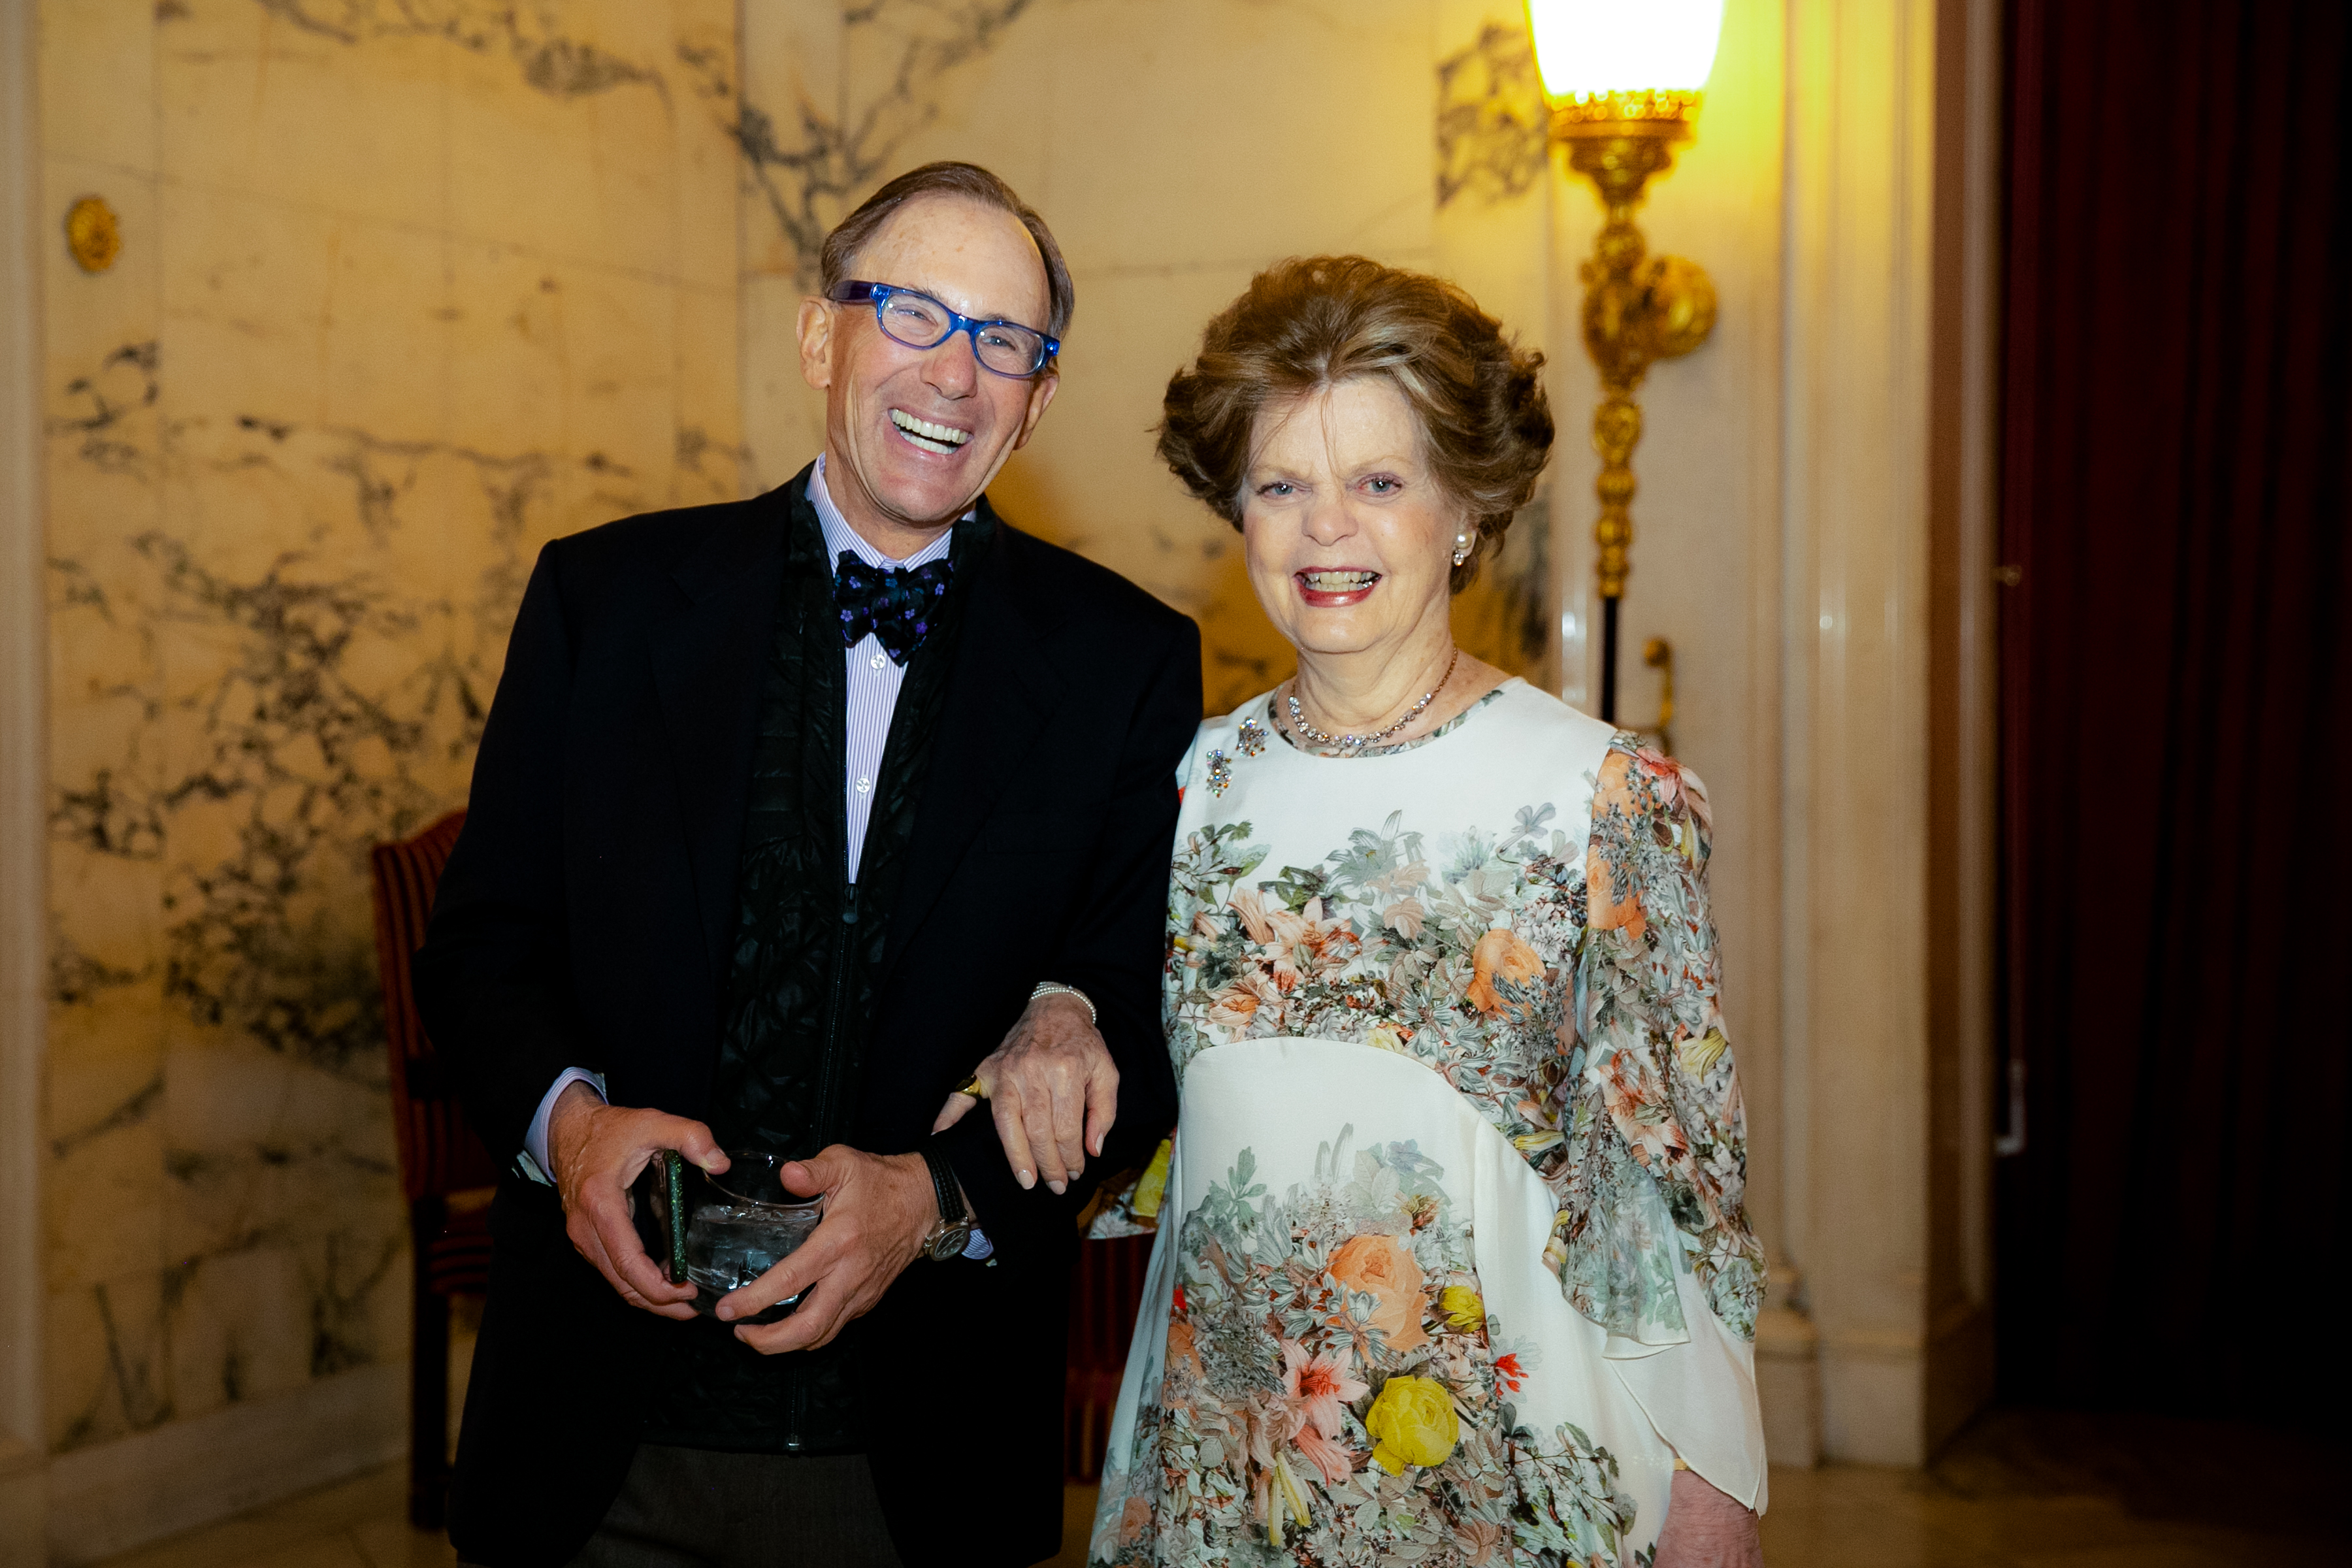 Dr. Legato poses with a laughing man at the 2019 Gala Event